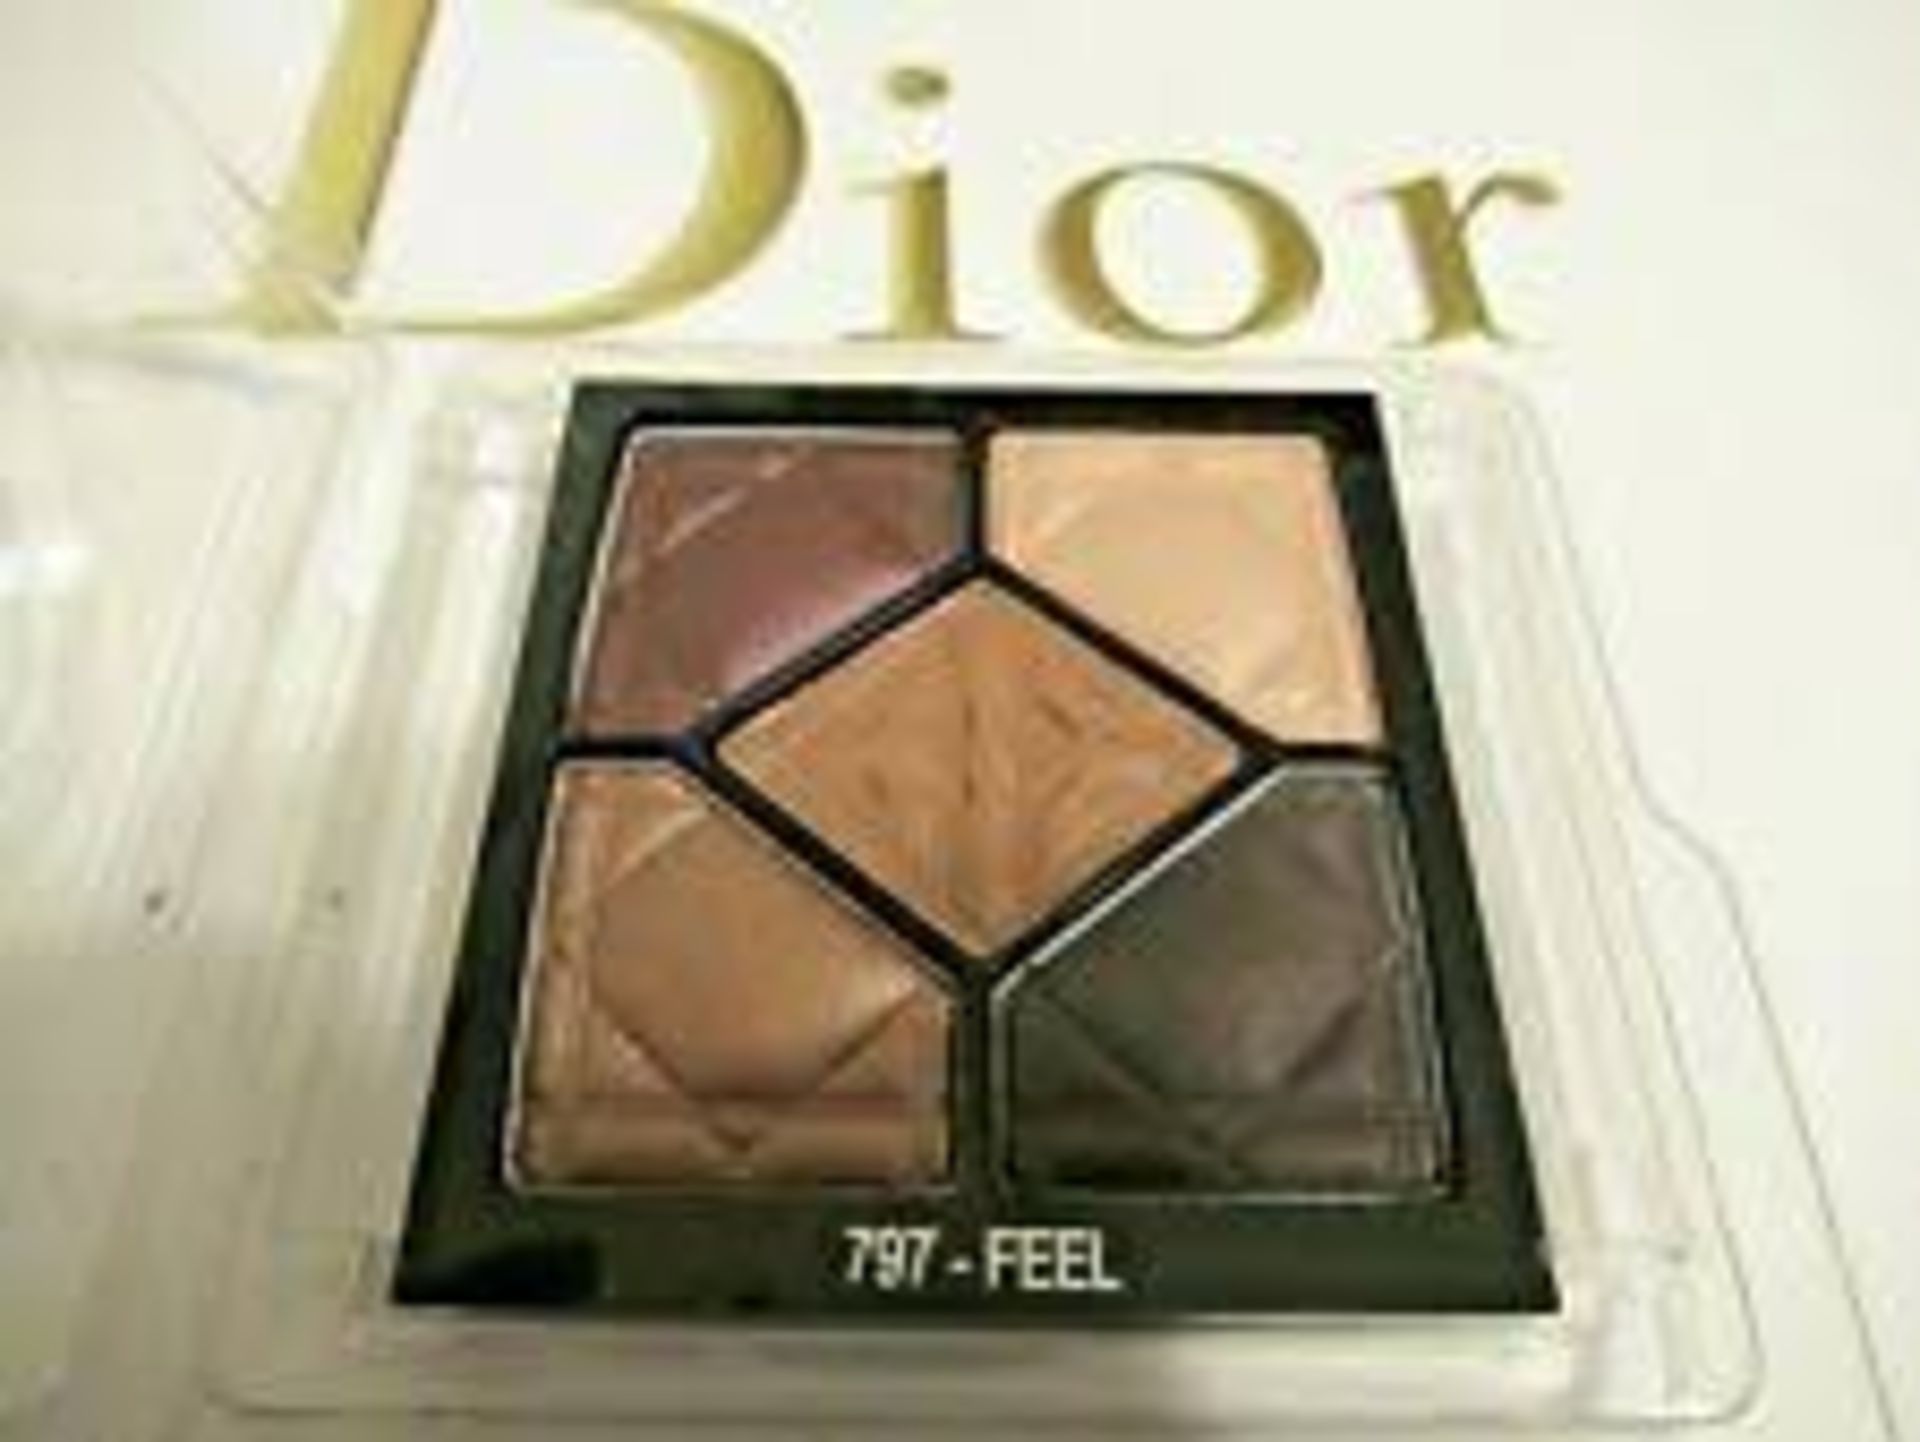 RRP £47 Dior 5 Couleurs Eyeshadow (Shade 797 Feel) (Ex Display) (Appraisals Available Upon